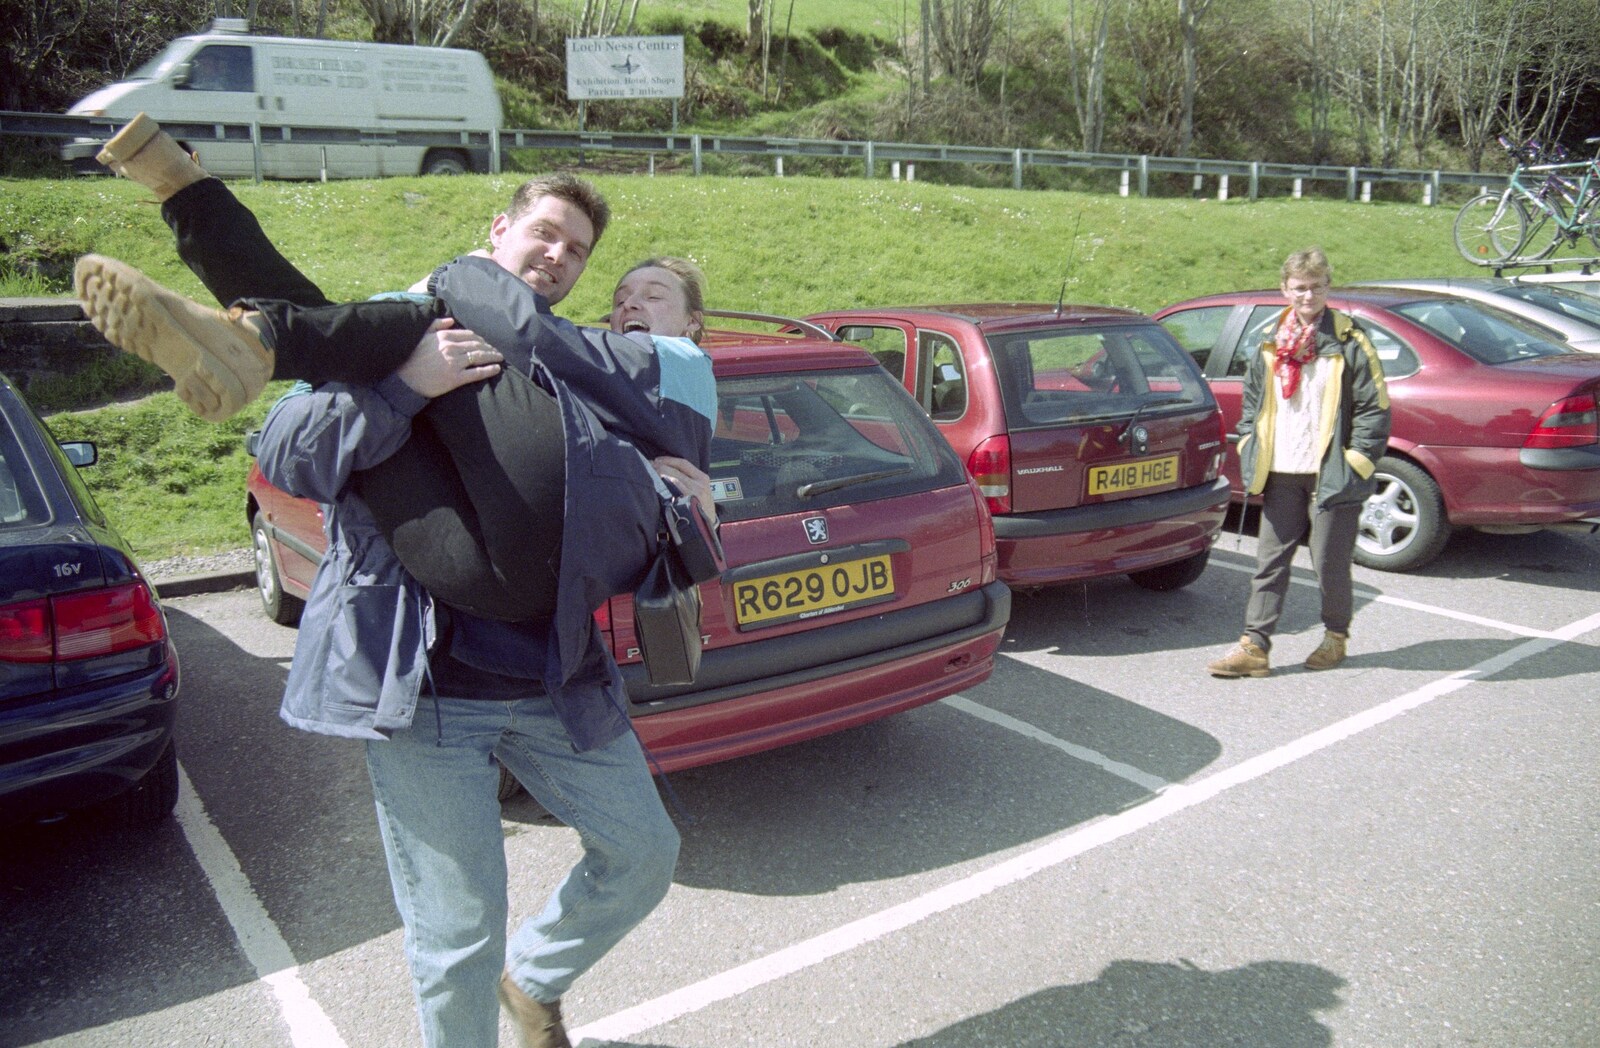 Sean flings Carole around in the car park from A Trip to Pitlochry, Scotland - 24th March 1998